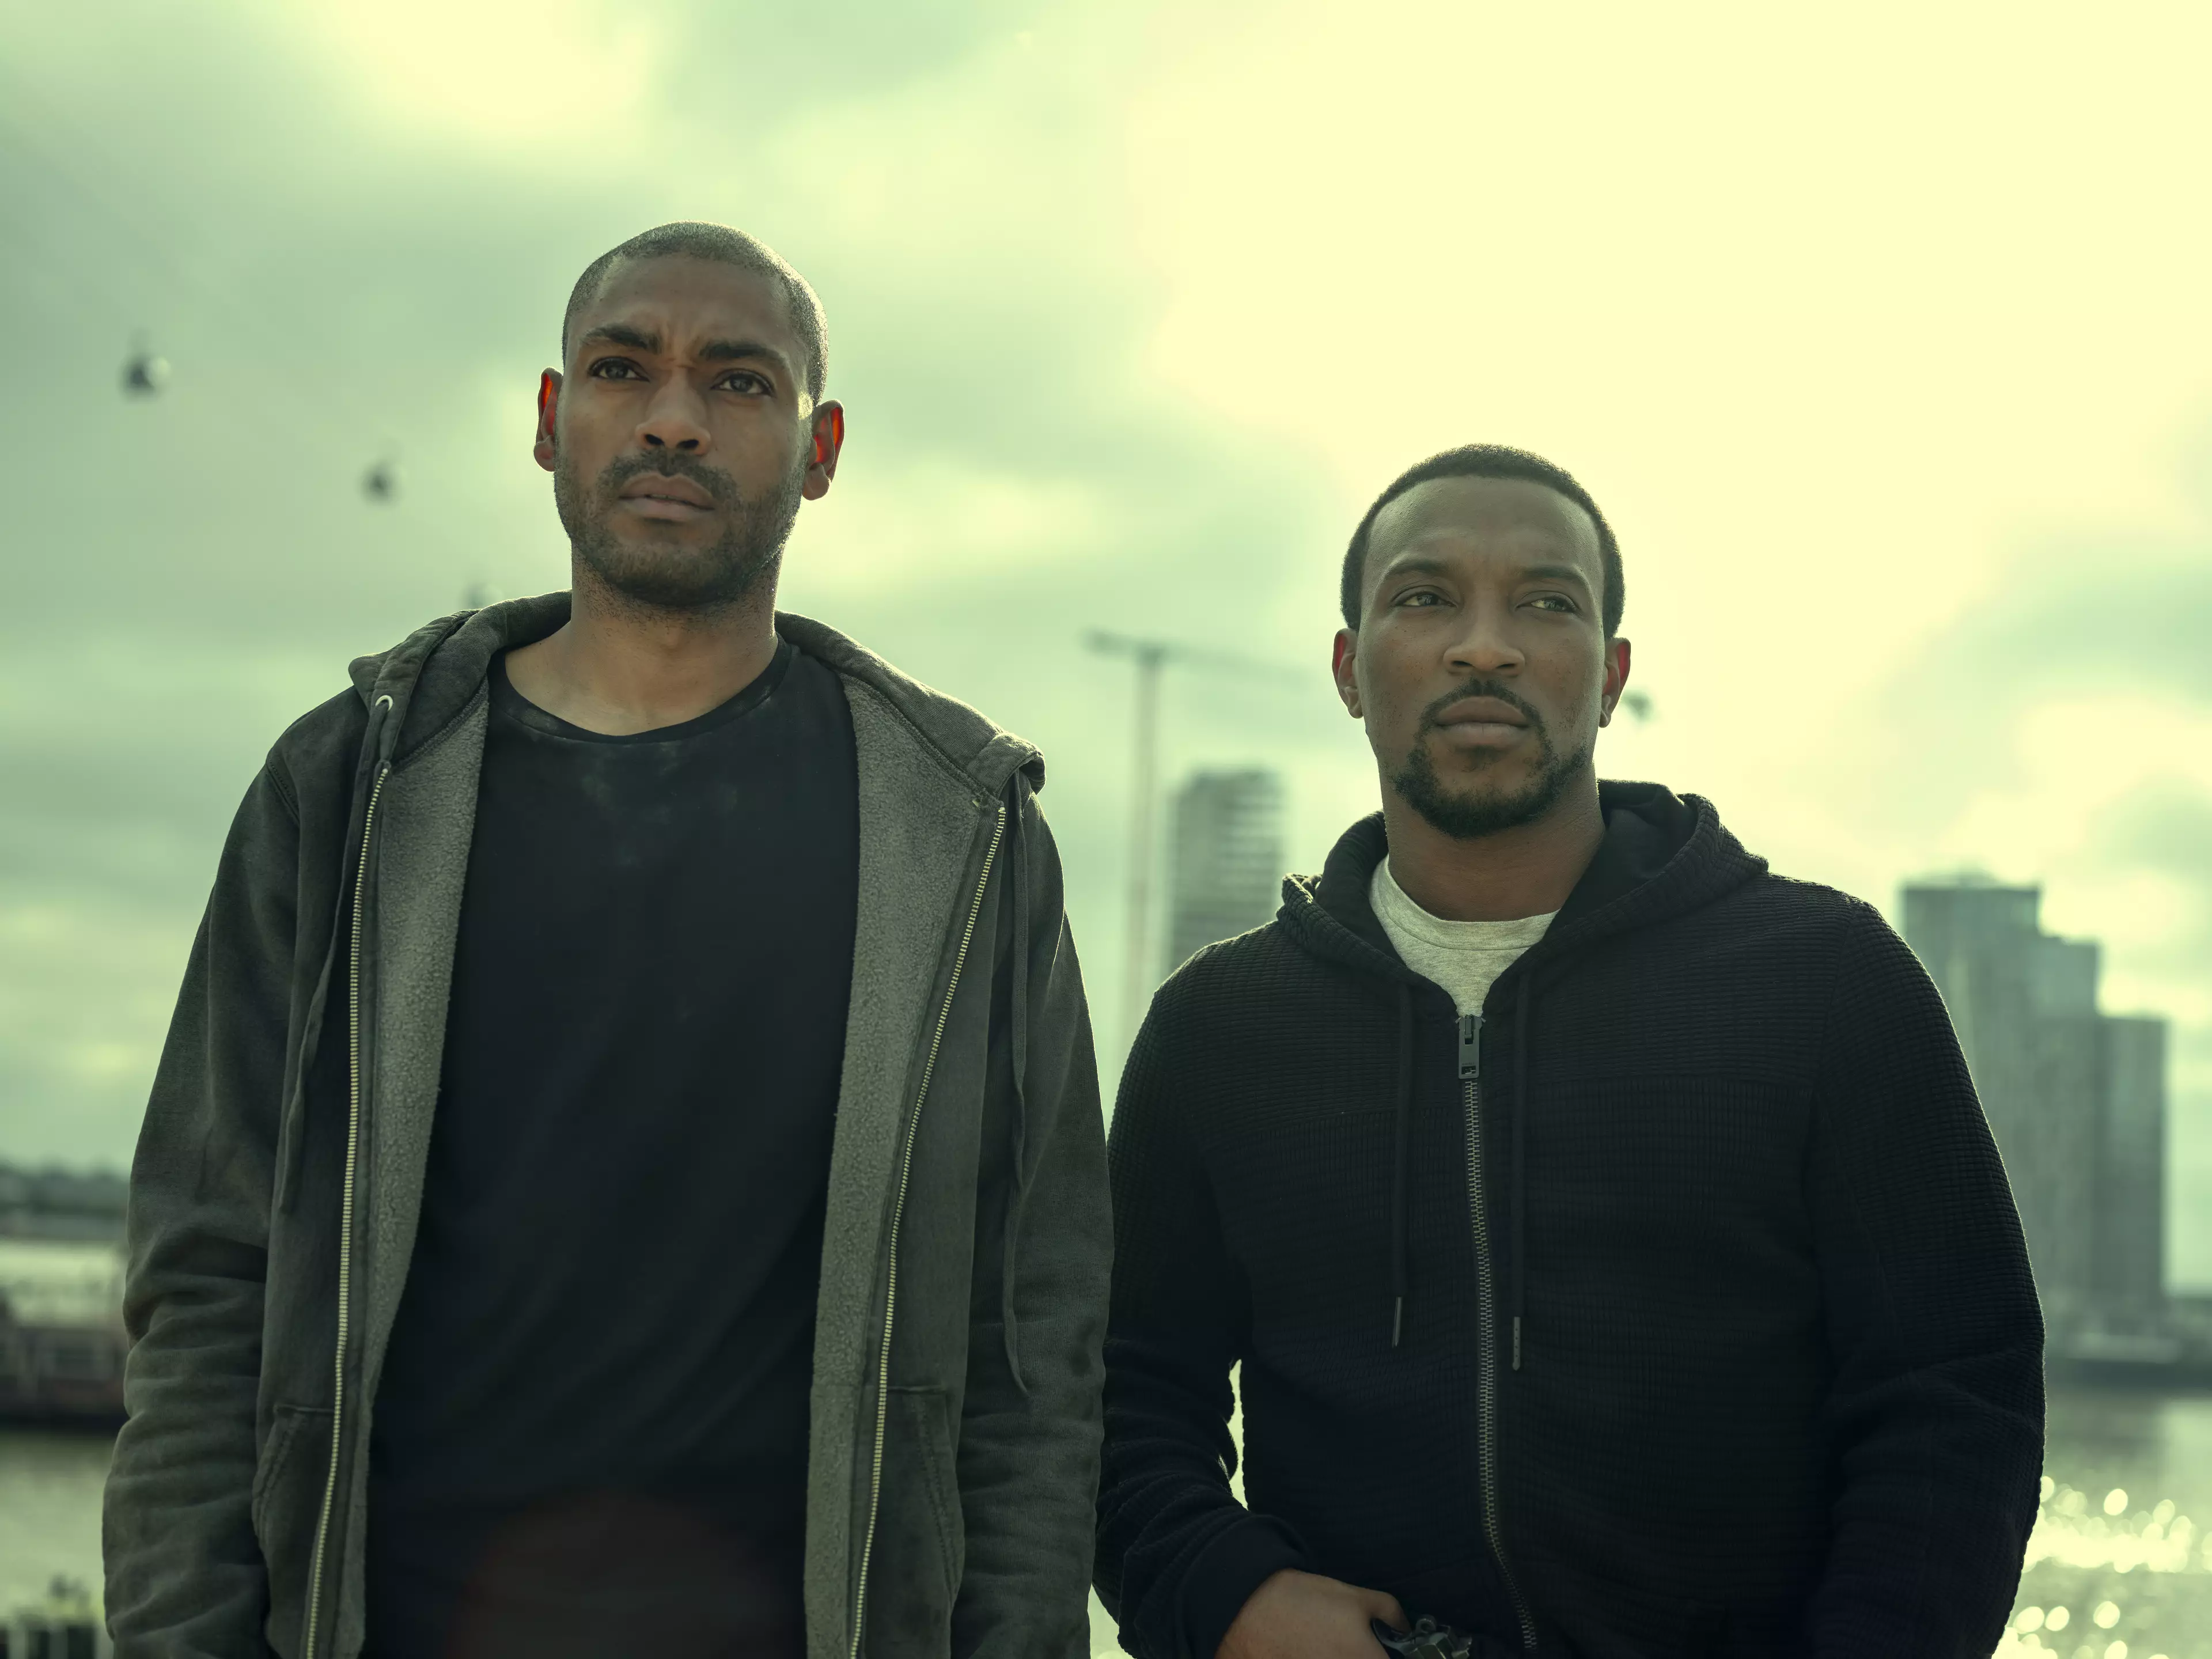 Who will be Top Boy in season 3?